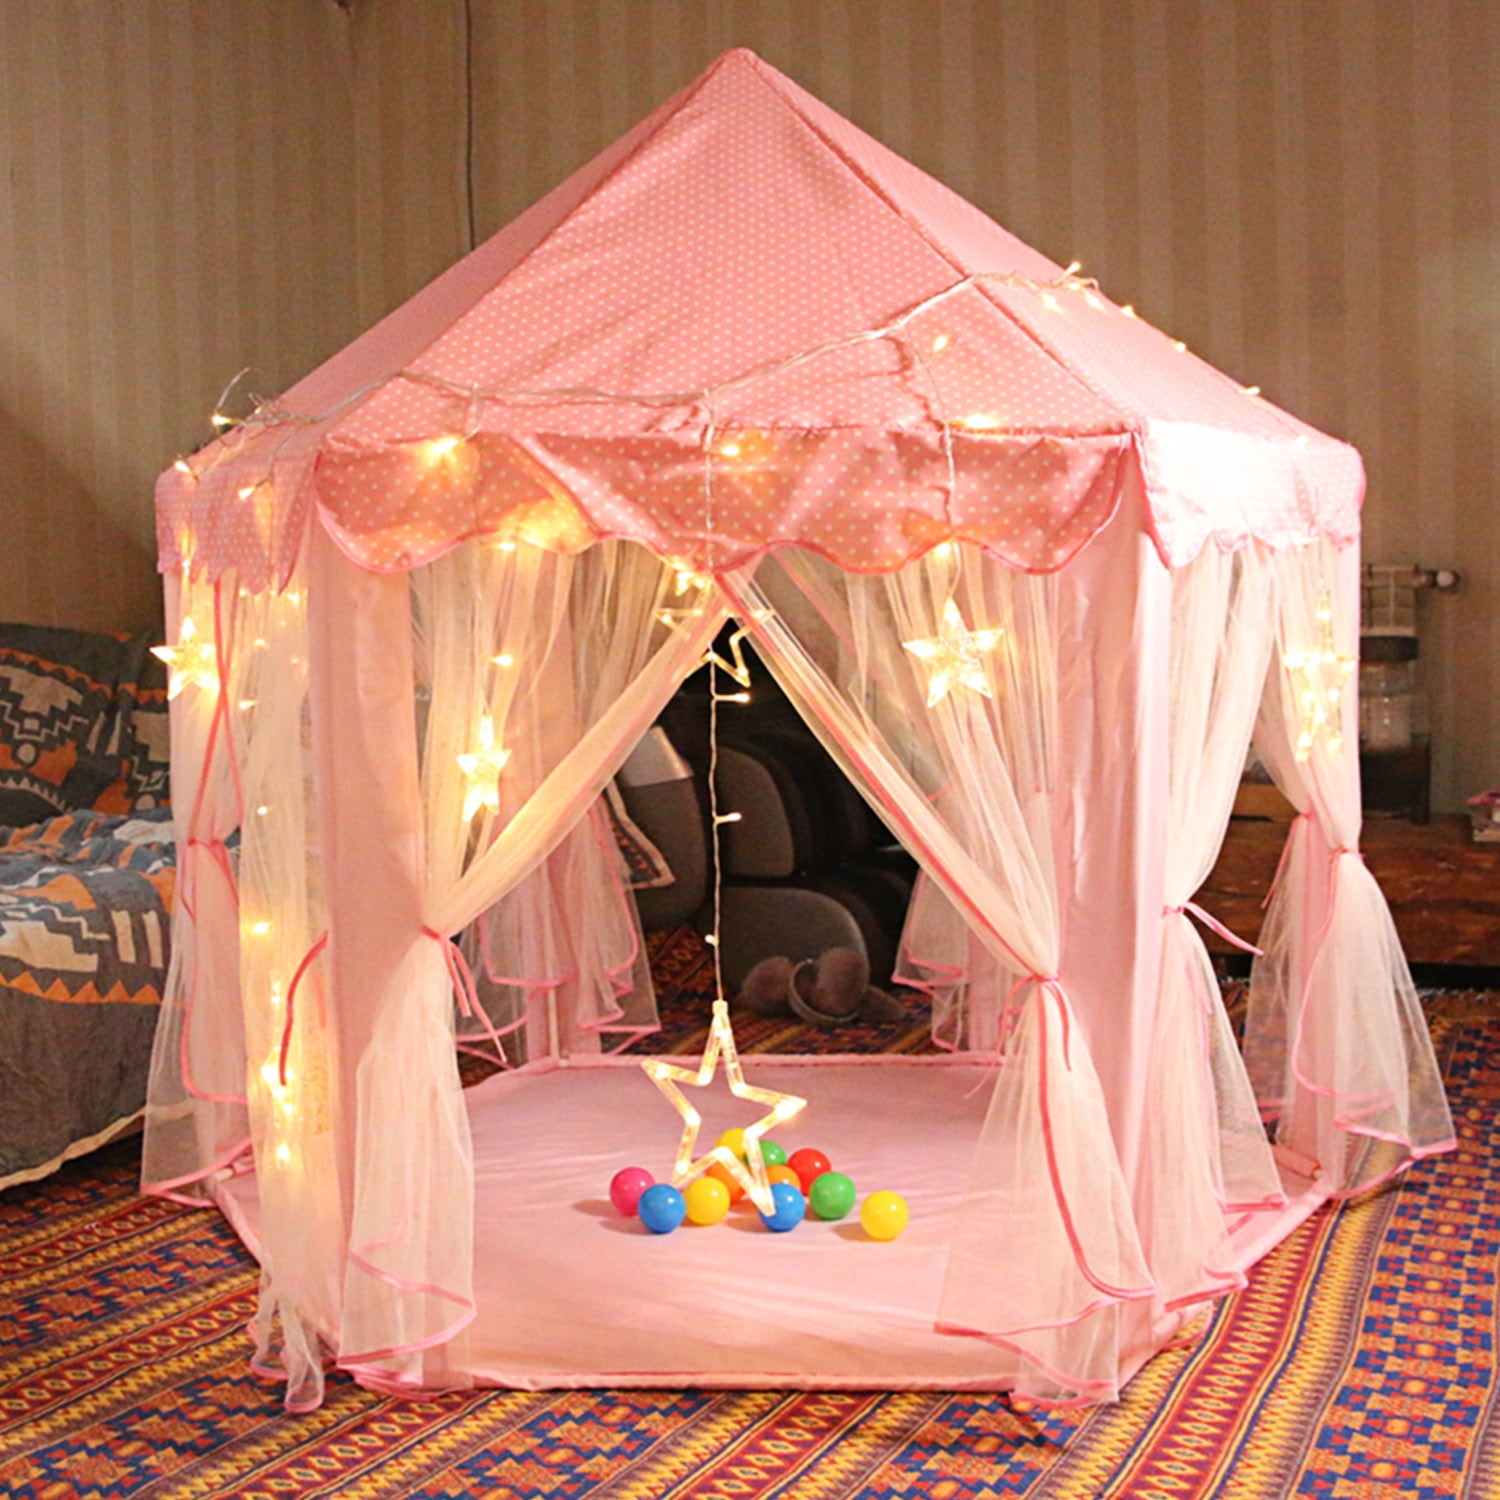 iMounTEK Indoor/Outdoor Fairy Princess Castle Tent 55"X53" Tent Play House Tent Gift with Carry Case